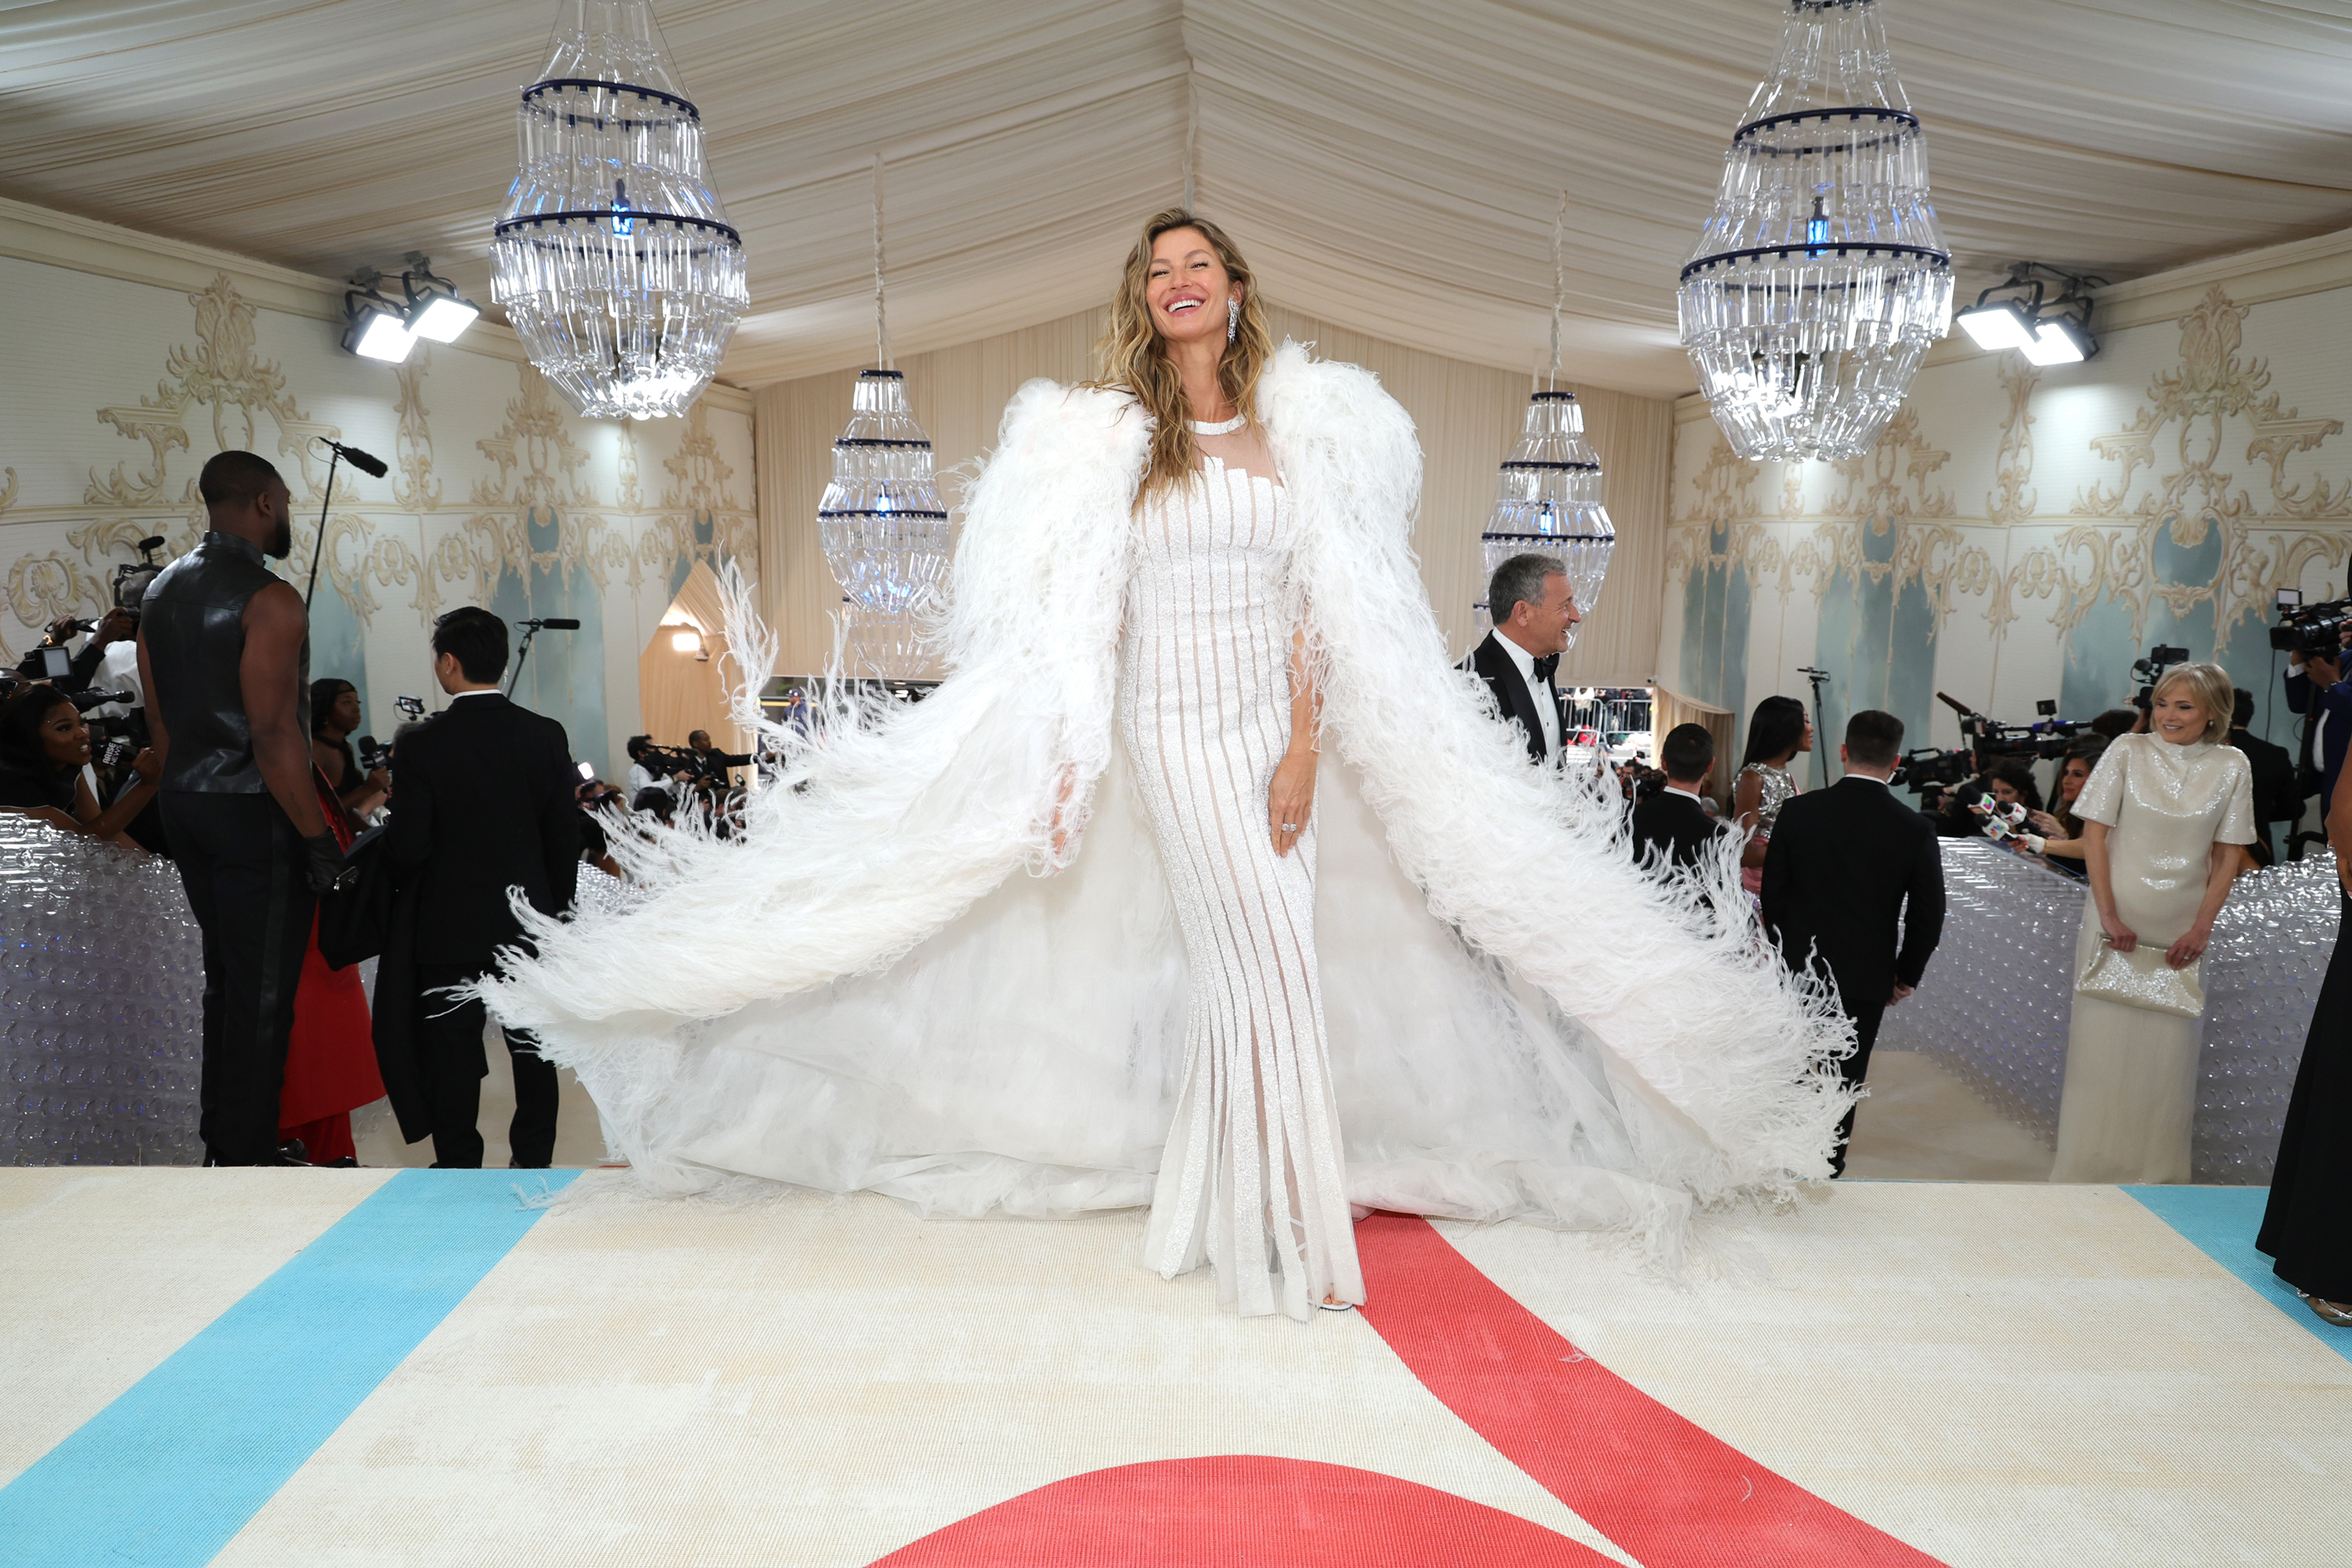 Gisele Bündchen previously wore her dress and feathery cape to an editorial  shoot with Karl Lagerfeld